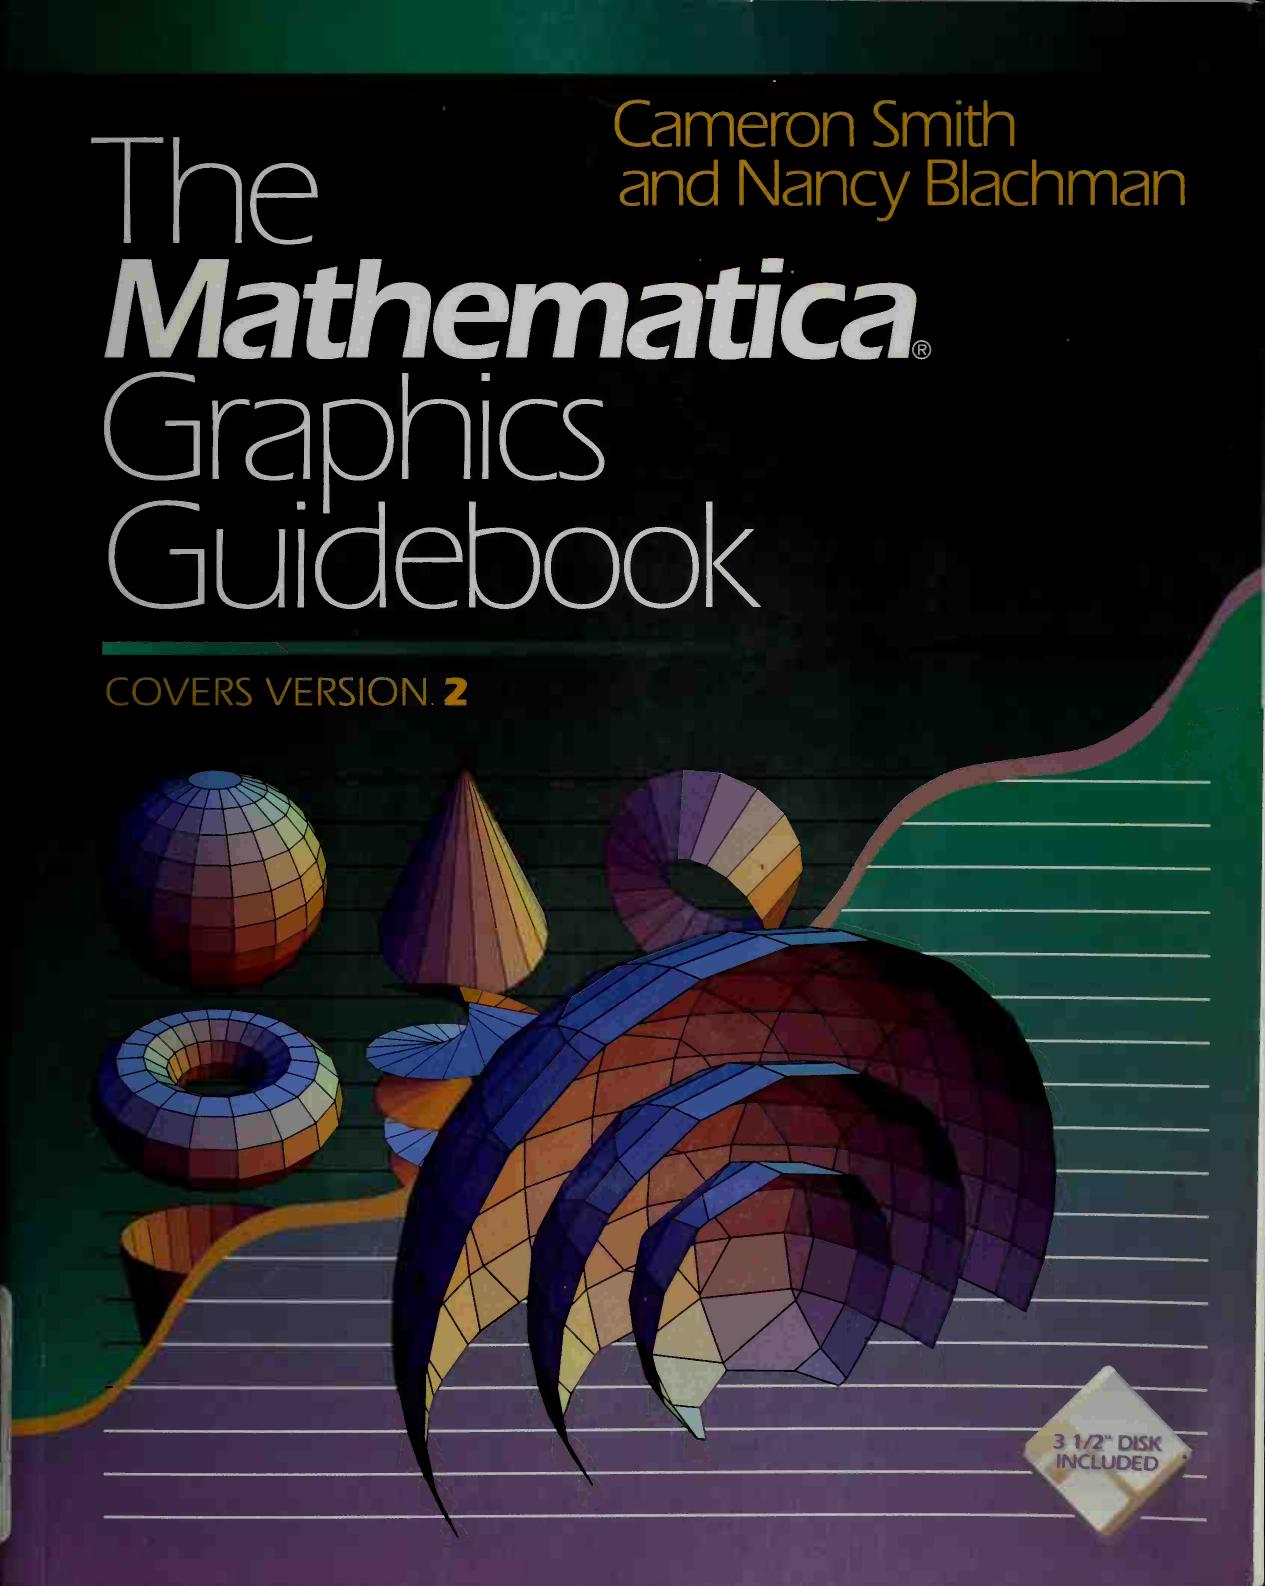 The Mathematica® Graphics Guidebook